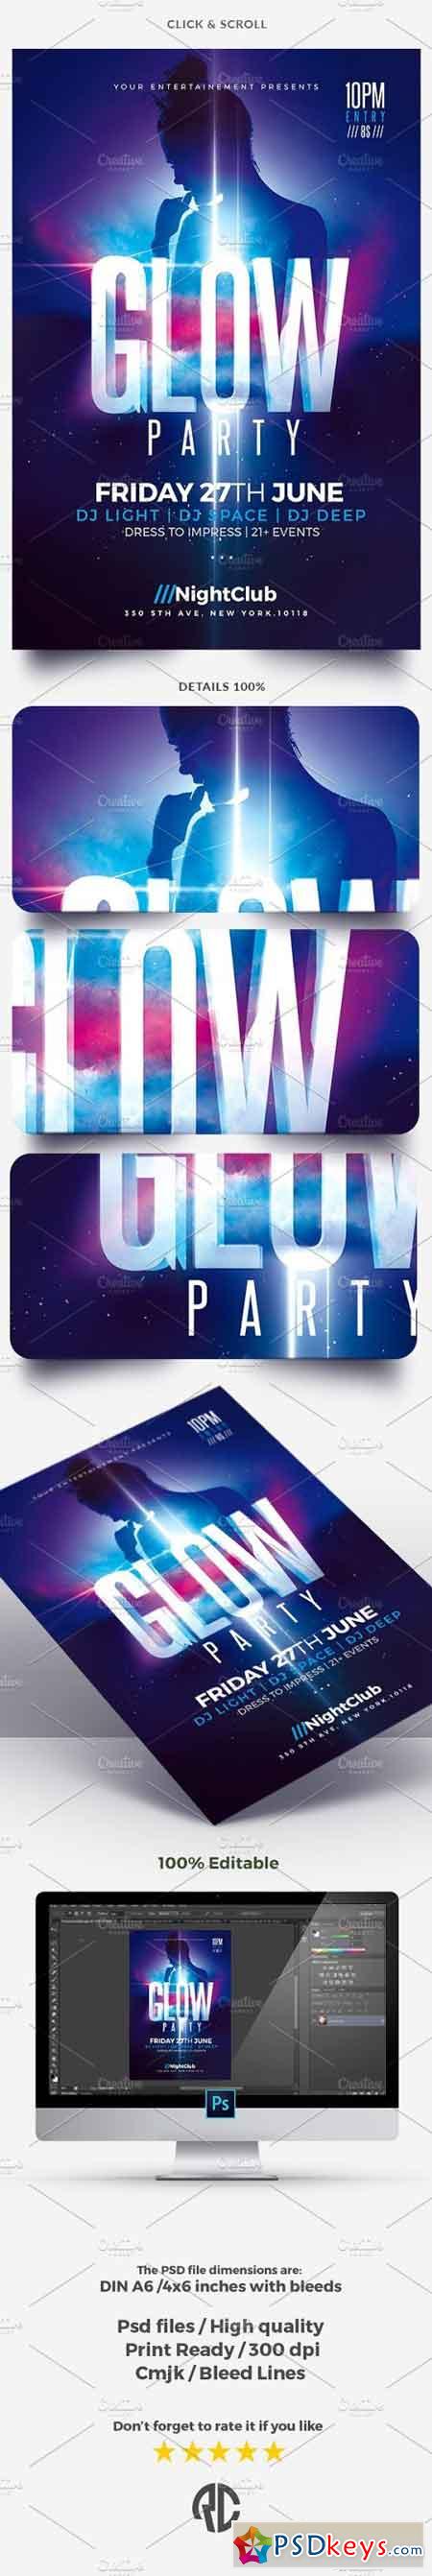 Glow Party - Flyer Template 1569534